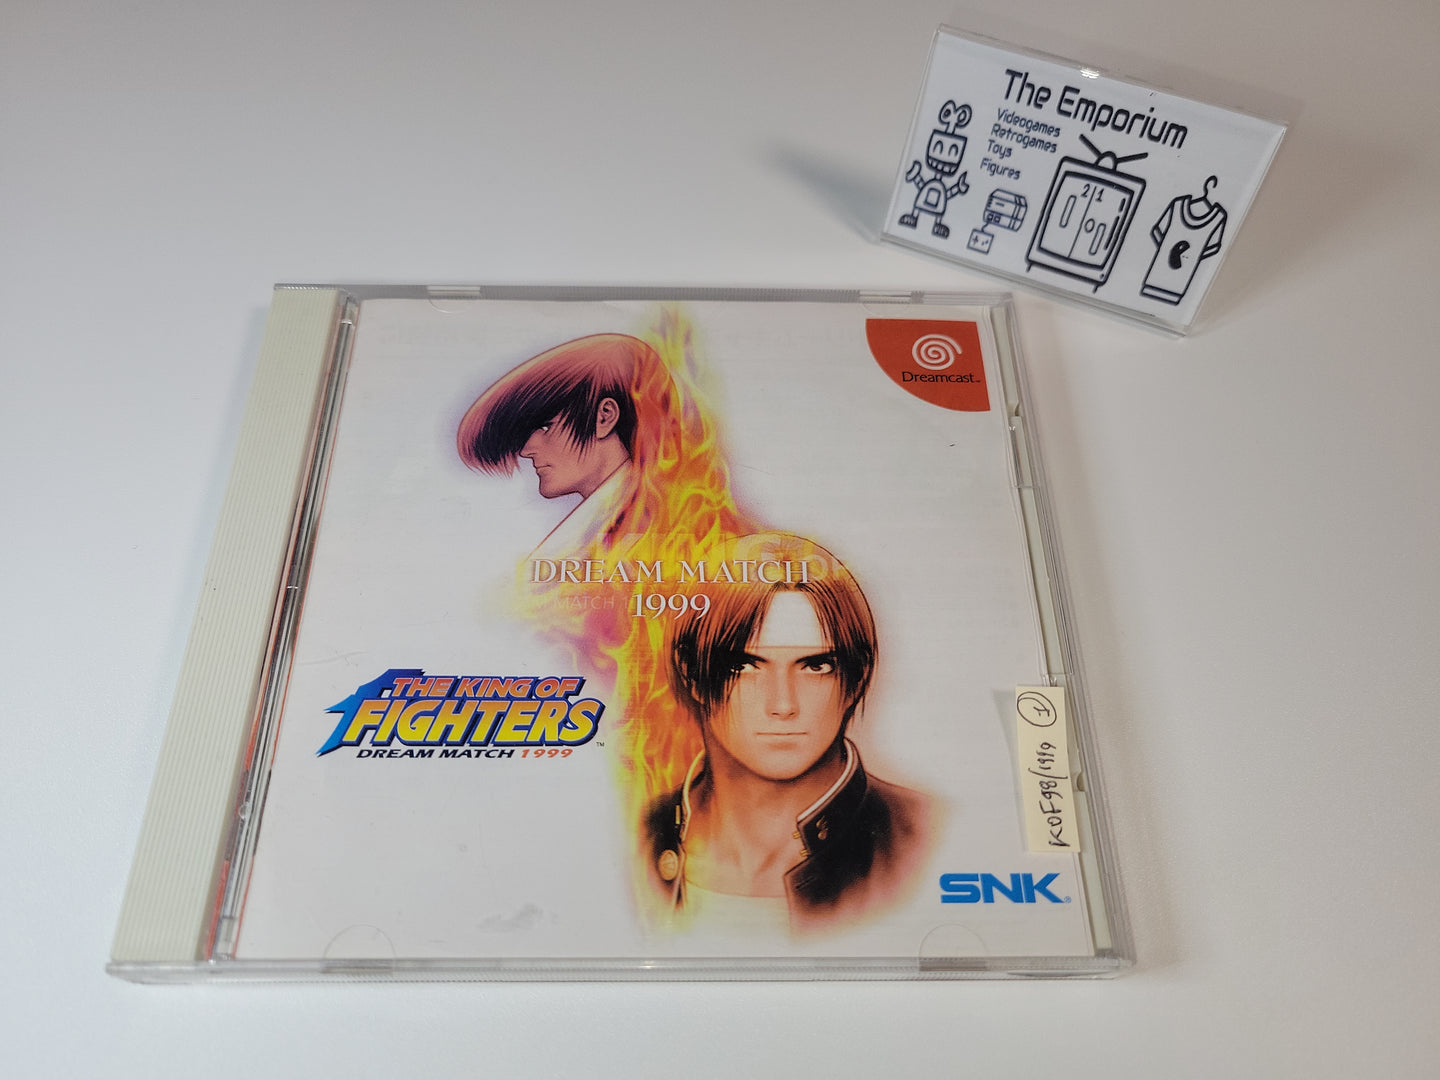 The king of fighters 98 Dream Match 1999 - Sega dc Dreamcast